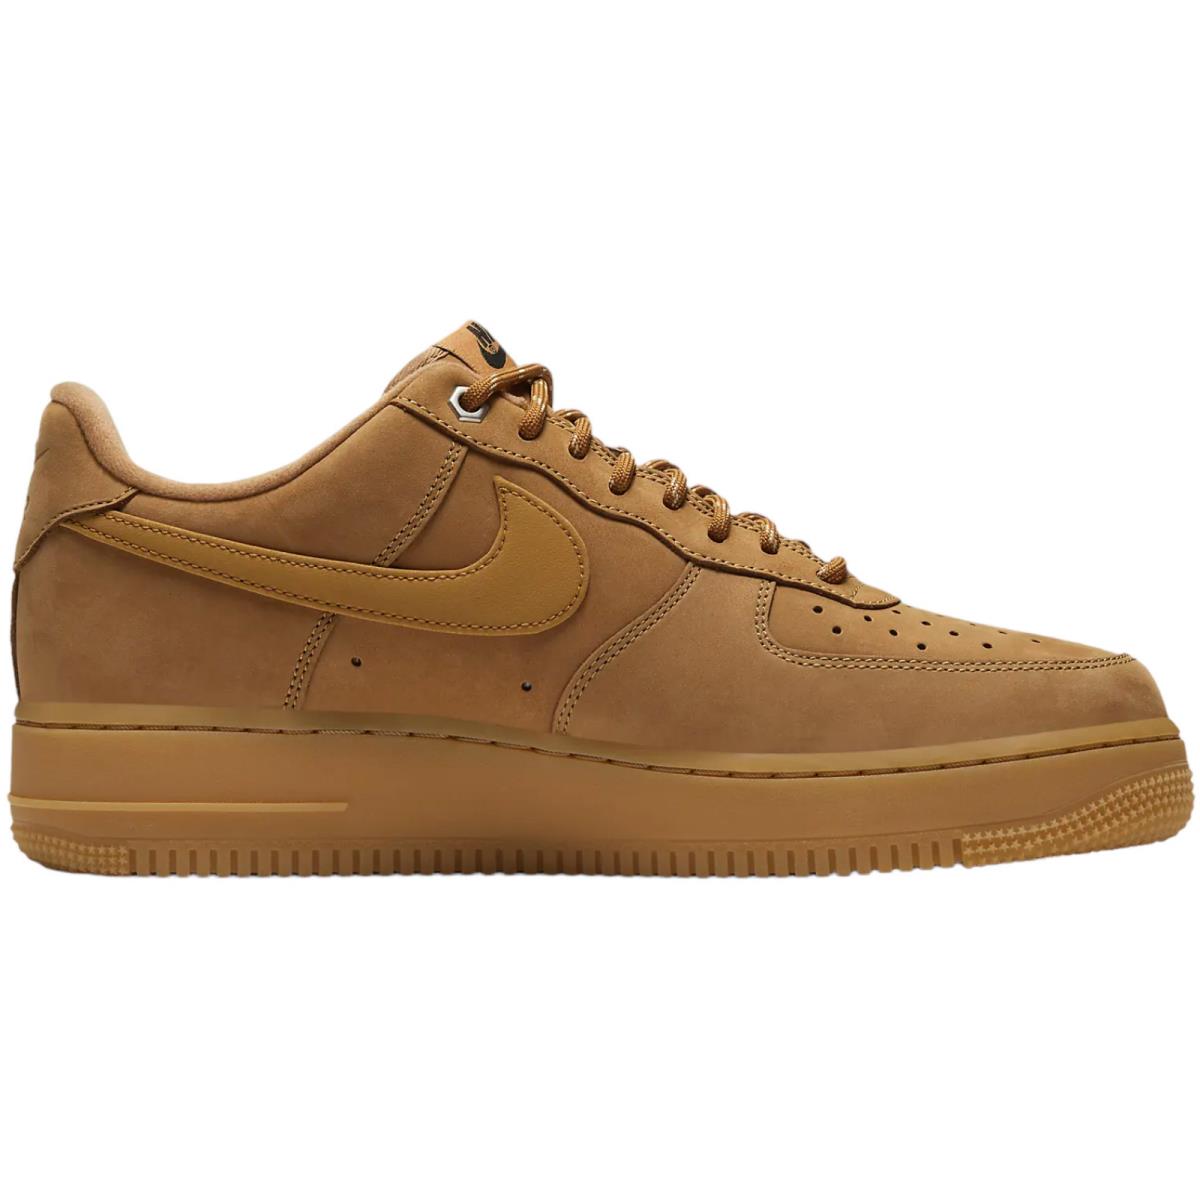 Nike Air Force 1 `07 Men`s Casual Shoes All Colors US Sizes 7-14 Flax/Gum Light Brown/Black/Wheat